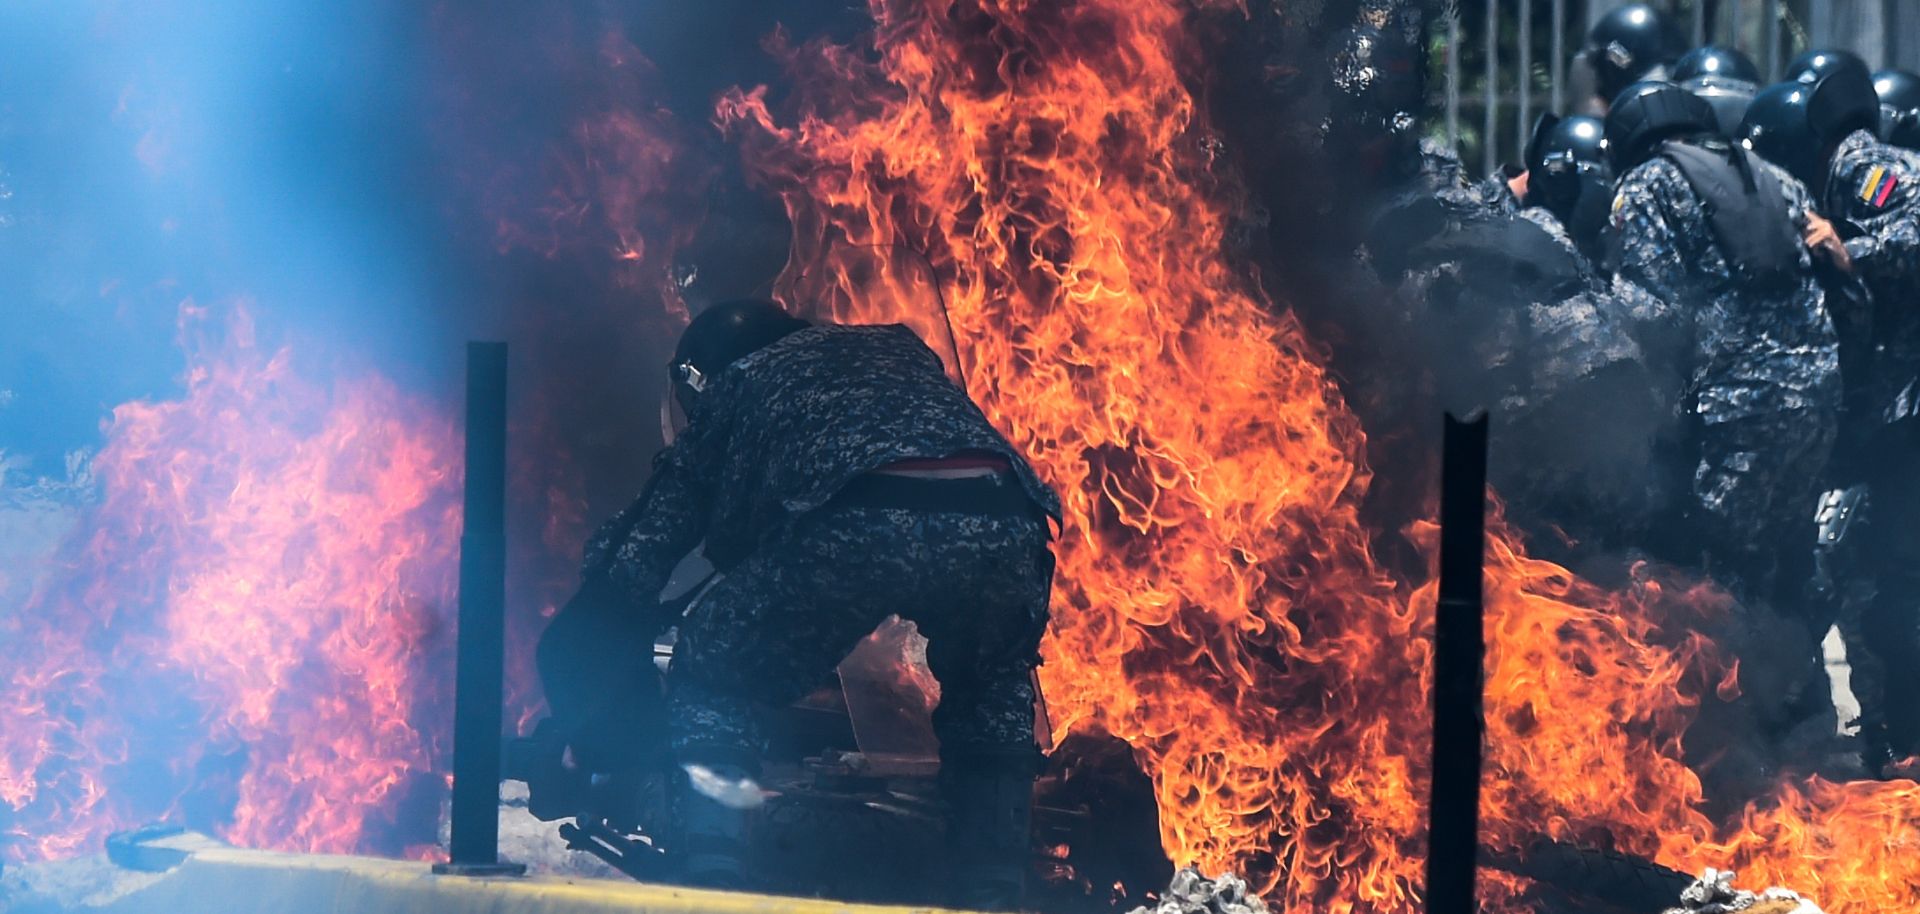 Police officers engulfed in flames from an incendiary device during protests in Caracas on July 30.